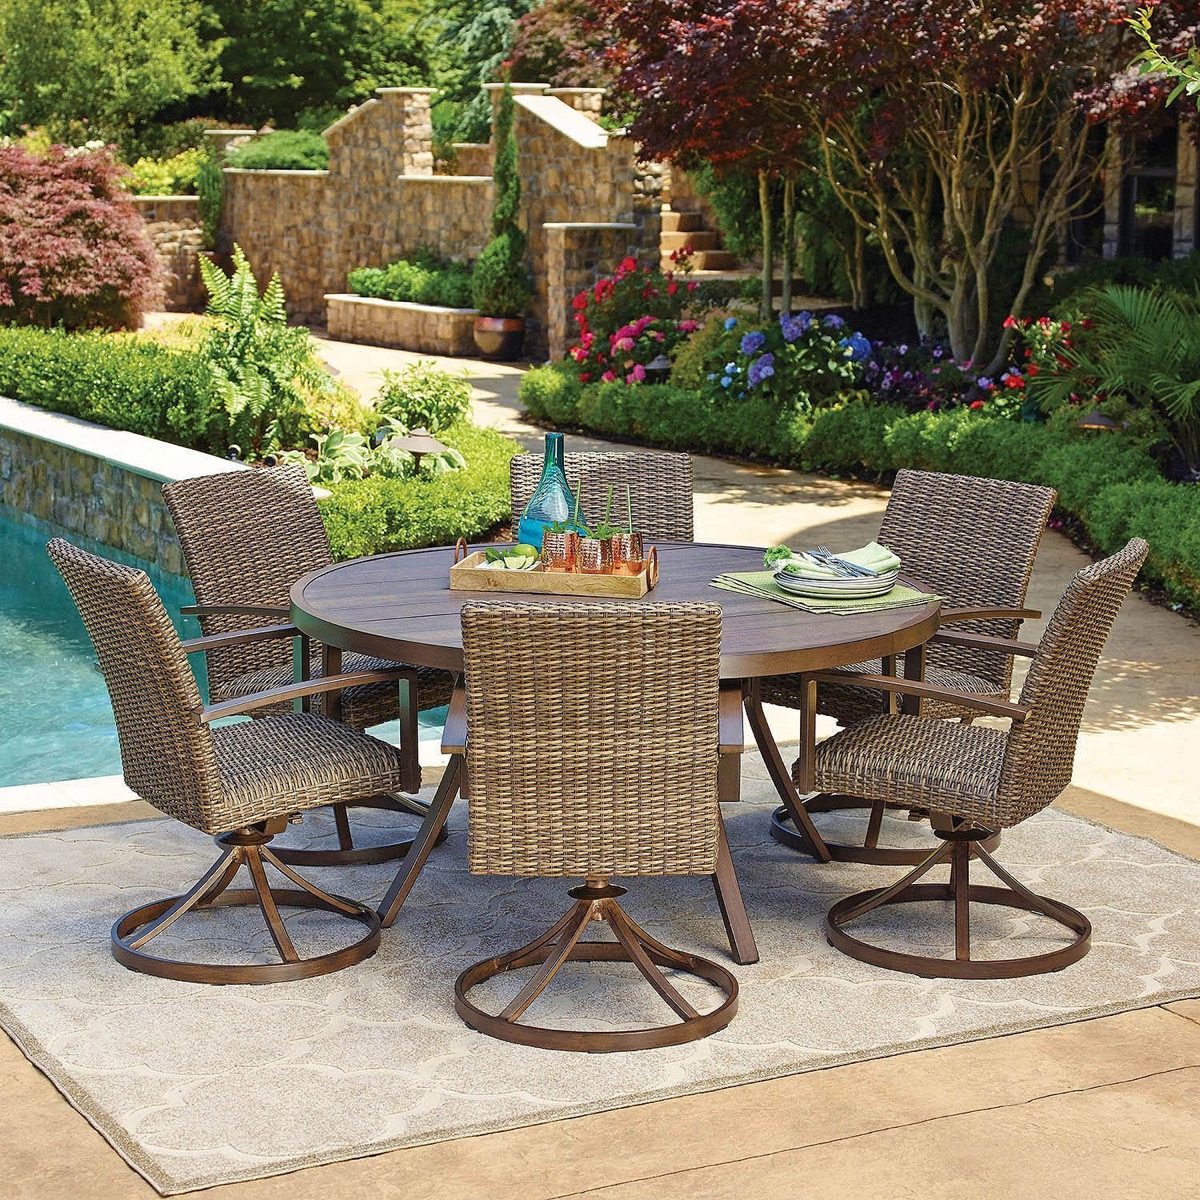 60 Inch Round Outdoor Dining Table And, Round Outdoor Dining Table For 6 With Swivel Chairs